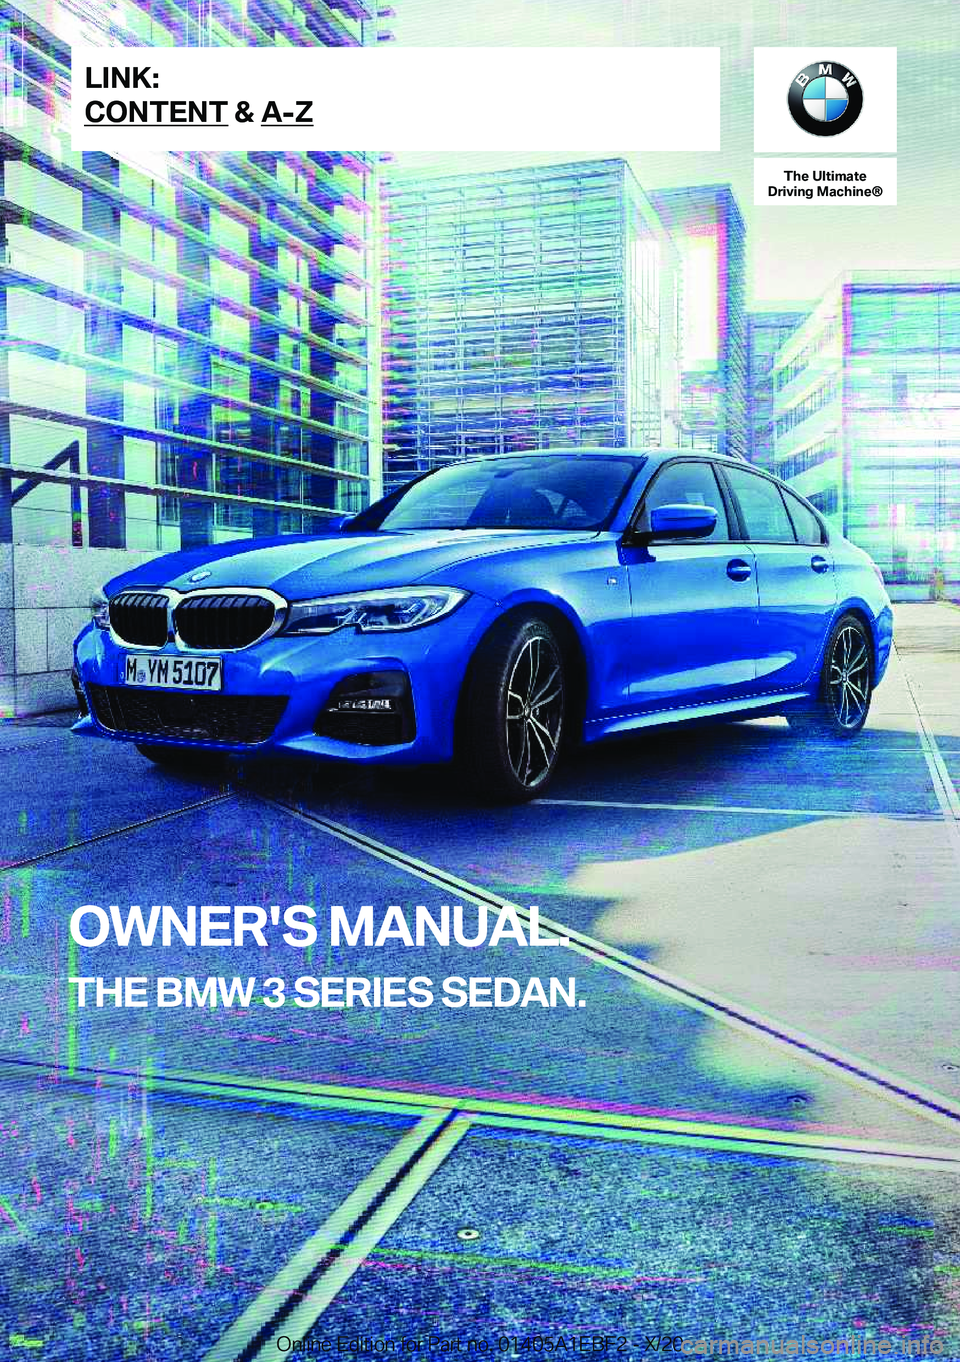 BMW 3 SERIES 2021  Owners Manual �T�h�e��U�l�t�i�m�a�t�e
�D�r�i�v�i�n�g��M�a�c�h�i�n�e�n
�O�W�N�E�R�'�S��M�A�N�U�A�L�.
�T�H�E��B�M�W��3��S�E�R�I�E�S��S�E�D�A�N�.�L�I�N�K�:
�C�O�N�T�E�N�T��&��A�-�Z�O�n�l�i�n�e��E�d�i�t�i